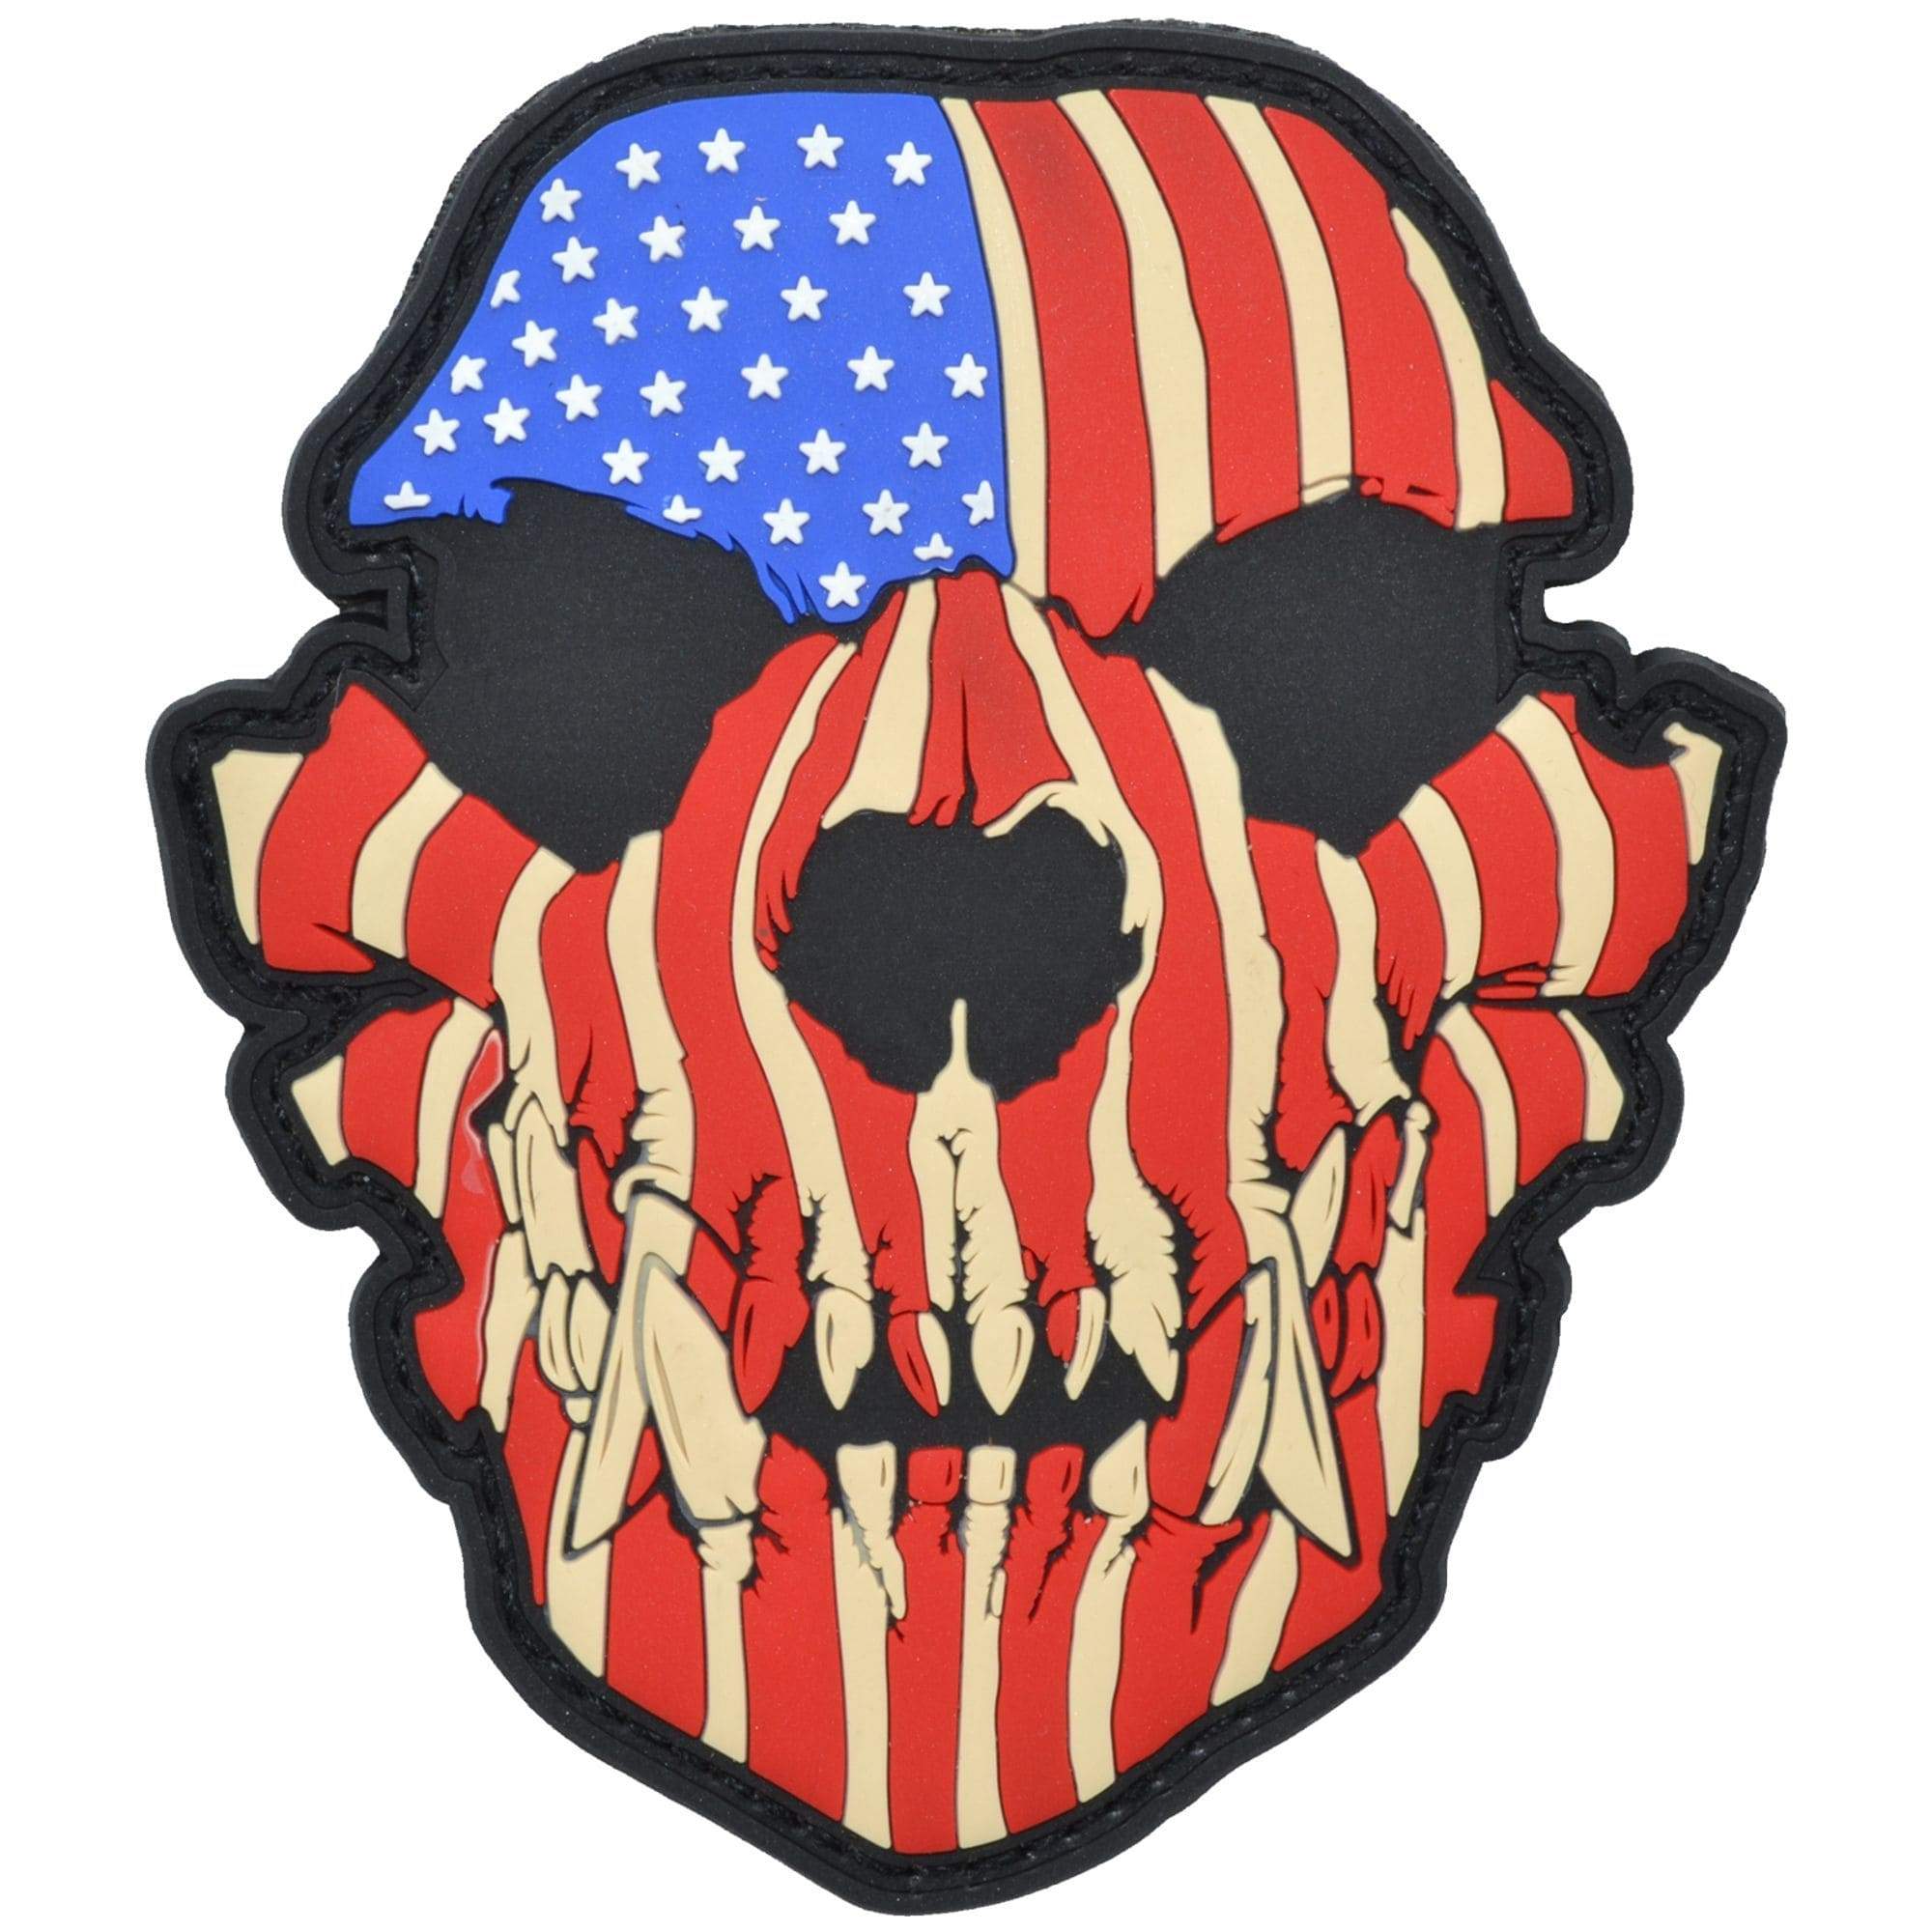 K9 K-9 Dog Canine Skull US Flag - 3x3.5 PVC Patch COLOR or GLOW IN THE